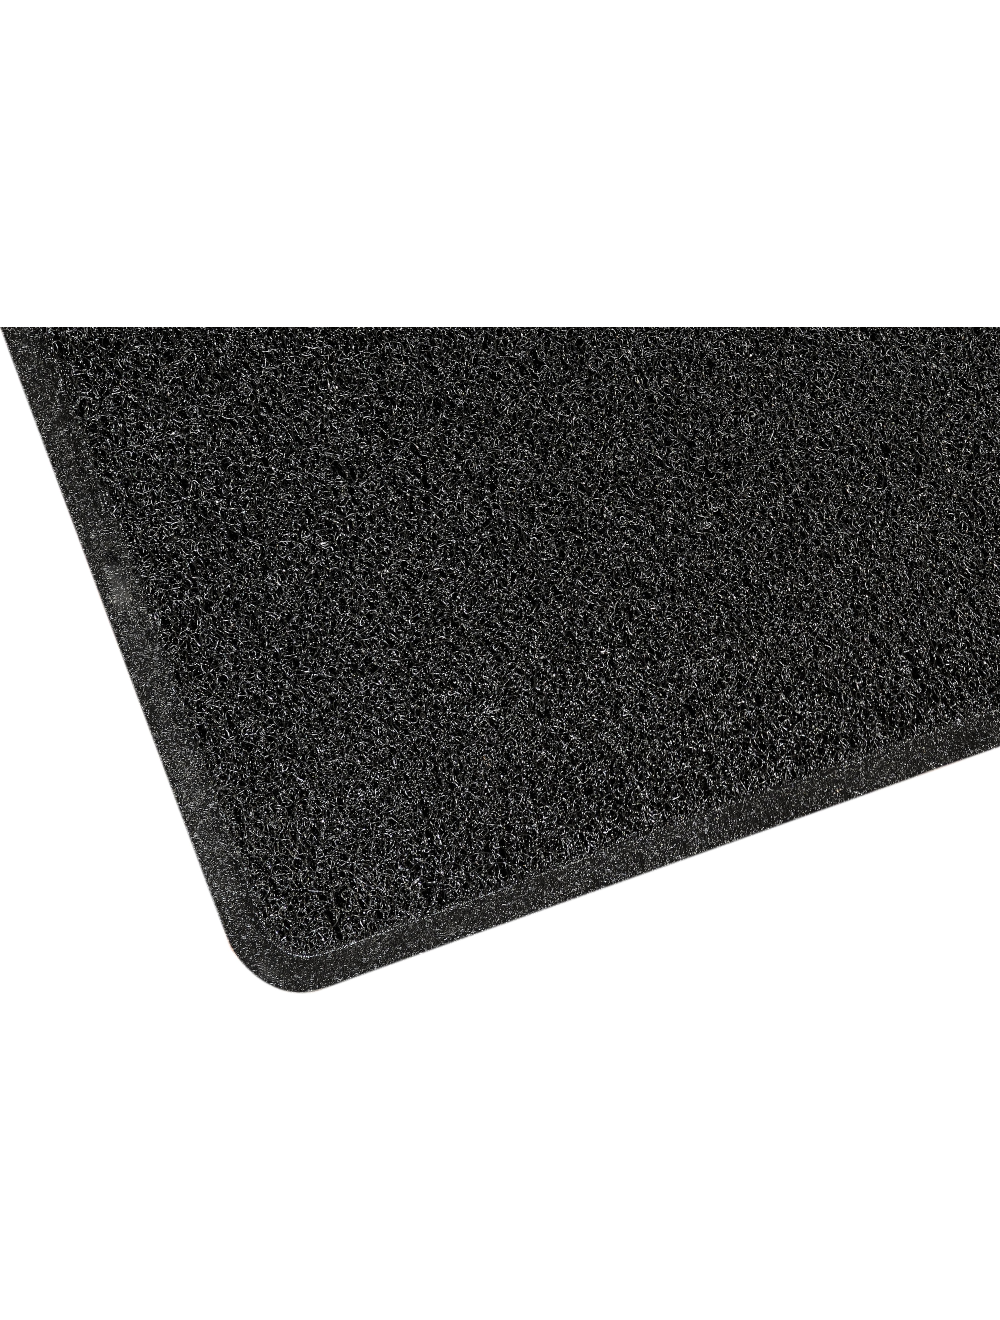 Extra Large Medium Small High Grade Top Quality Non Slip Door Mat Rubber Backed Runner Mats Rugs PVC 7mm thick Non Shedding Indoor / Outdoor Use 4 Colours 5 Sizes Made in EU AAA Grade & Quality Commercial Standard 3x5 Grey, 90x150cm 